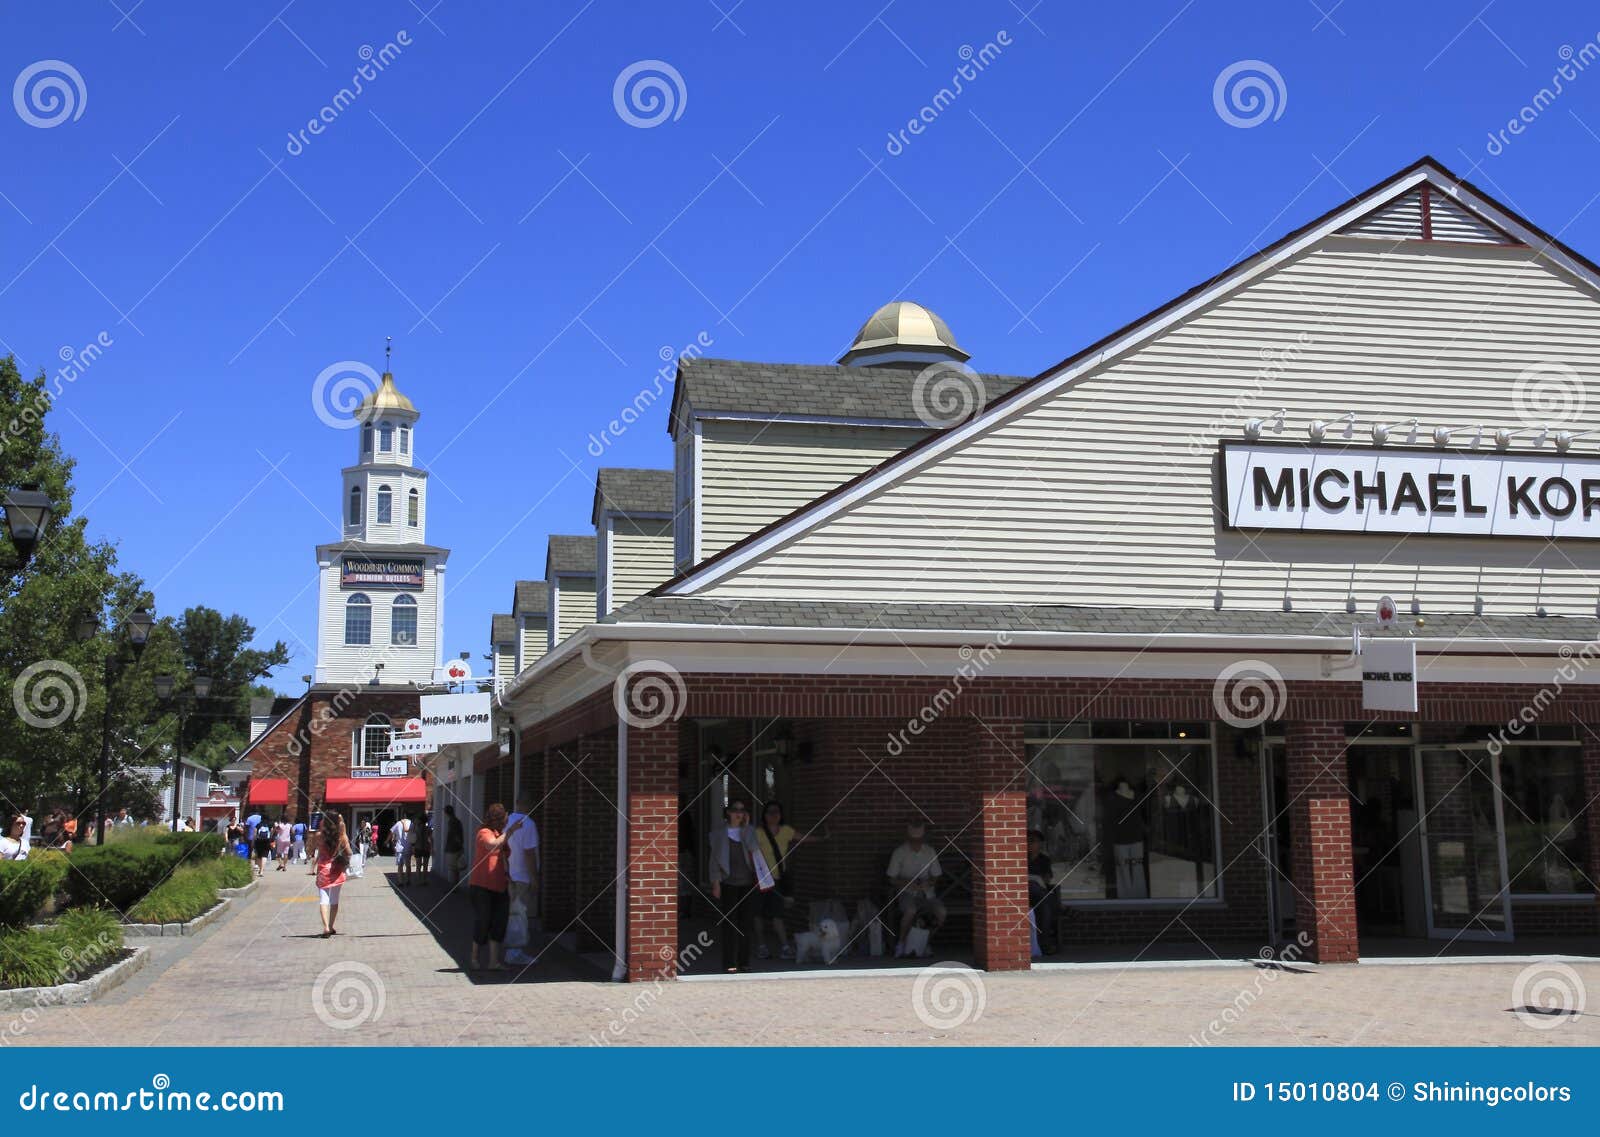 Woodbury Common Premium Outlets Editorial Stock Image - Image: 15010804